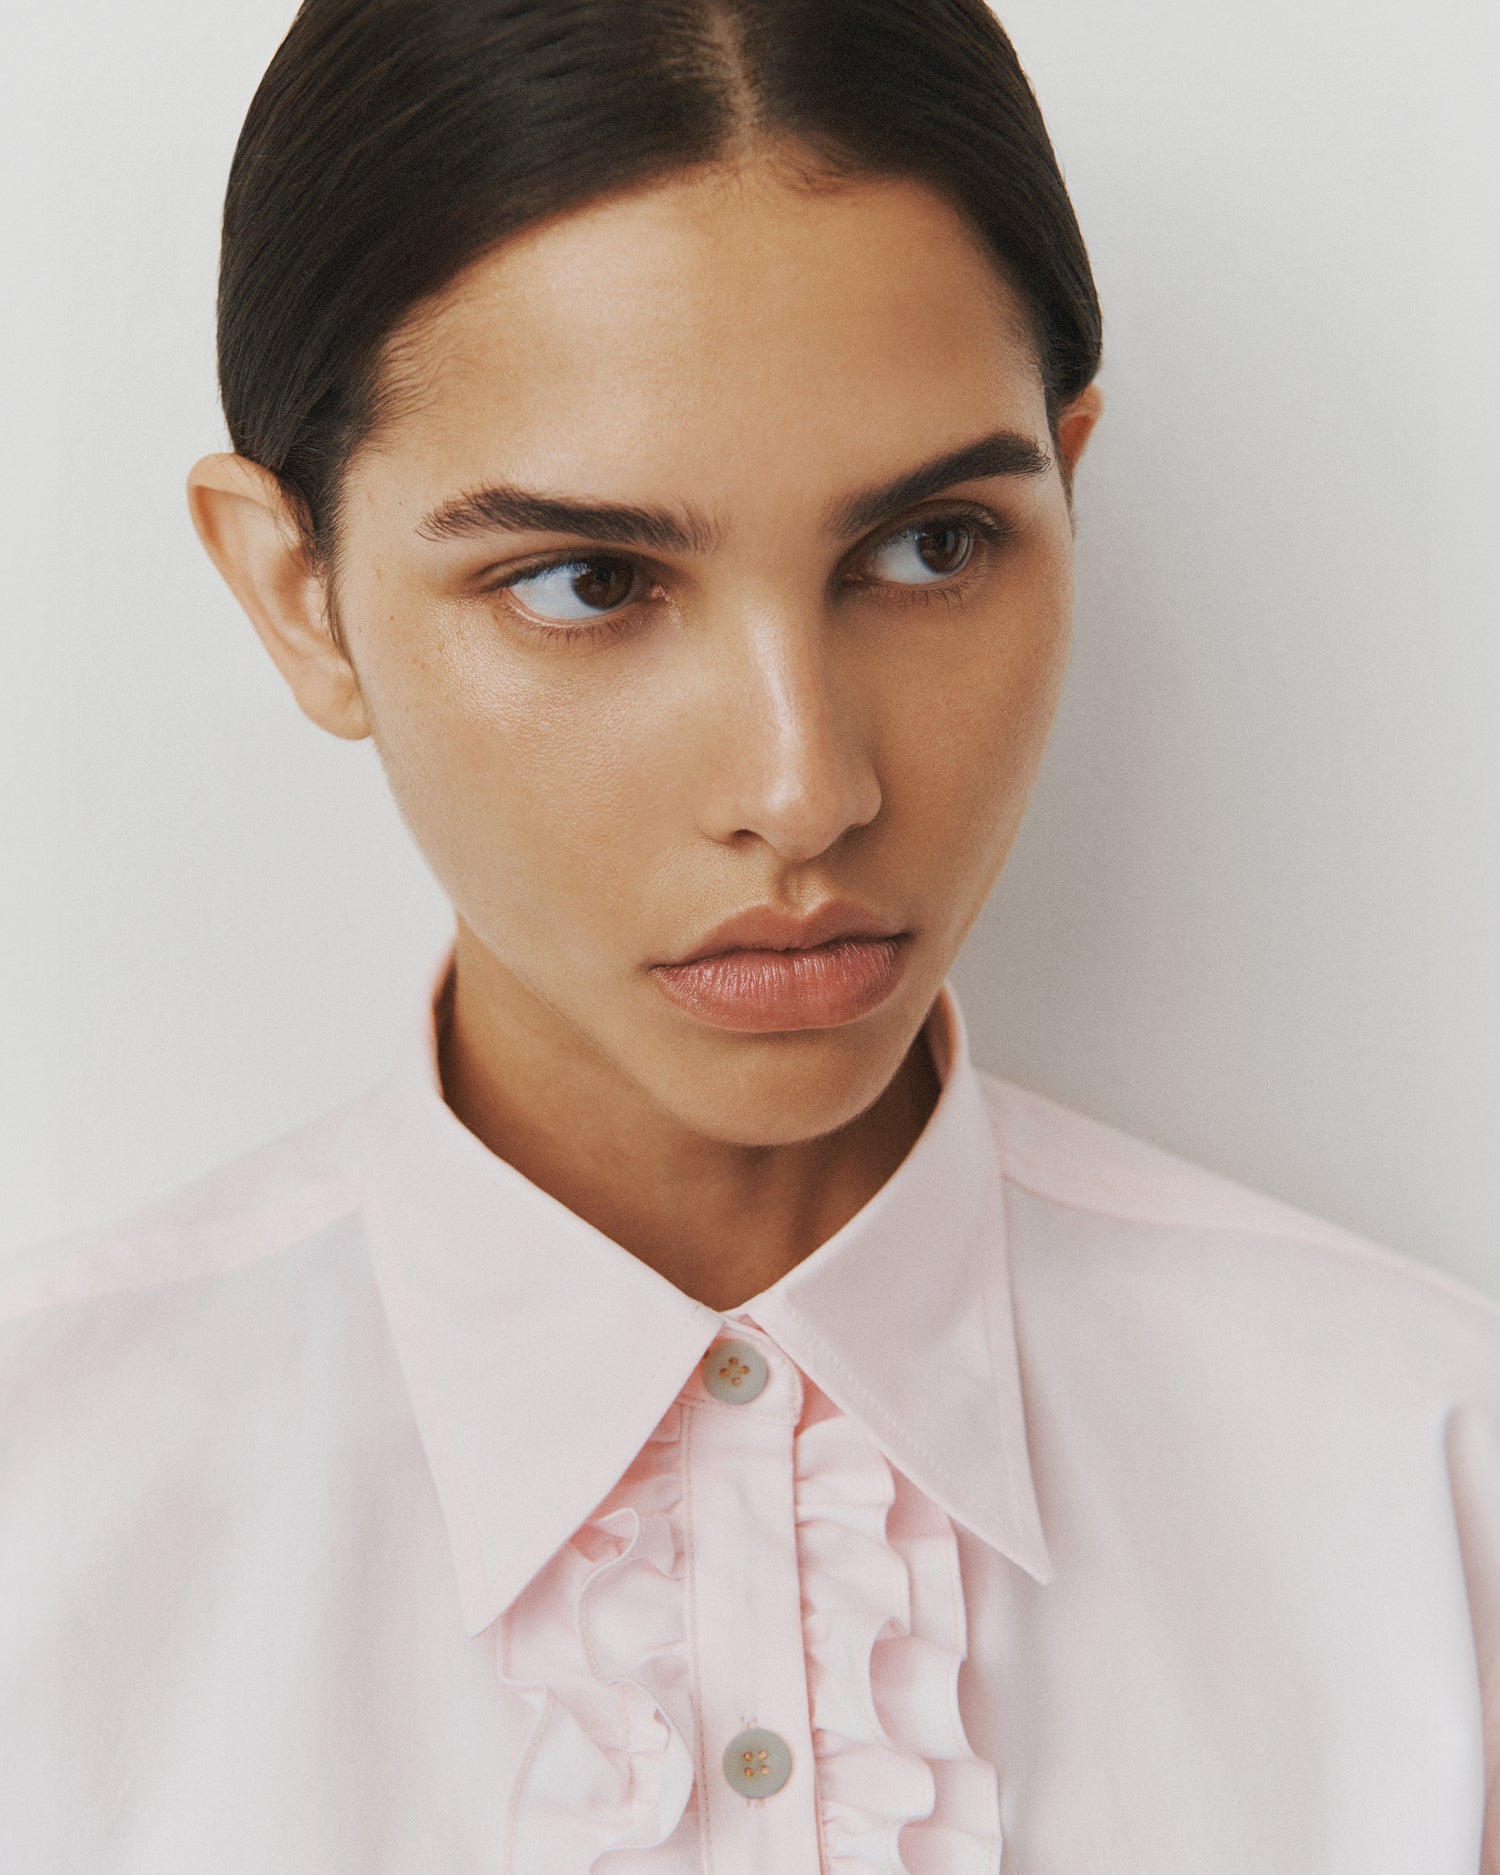 Close-up of a woman with slicked back brown hair wearing a light pink button-down with rows of ruffles at the placket.